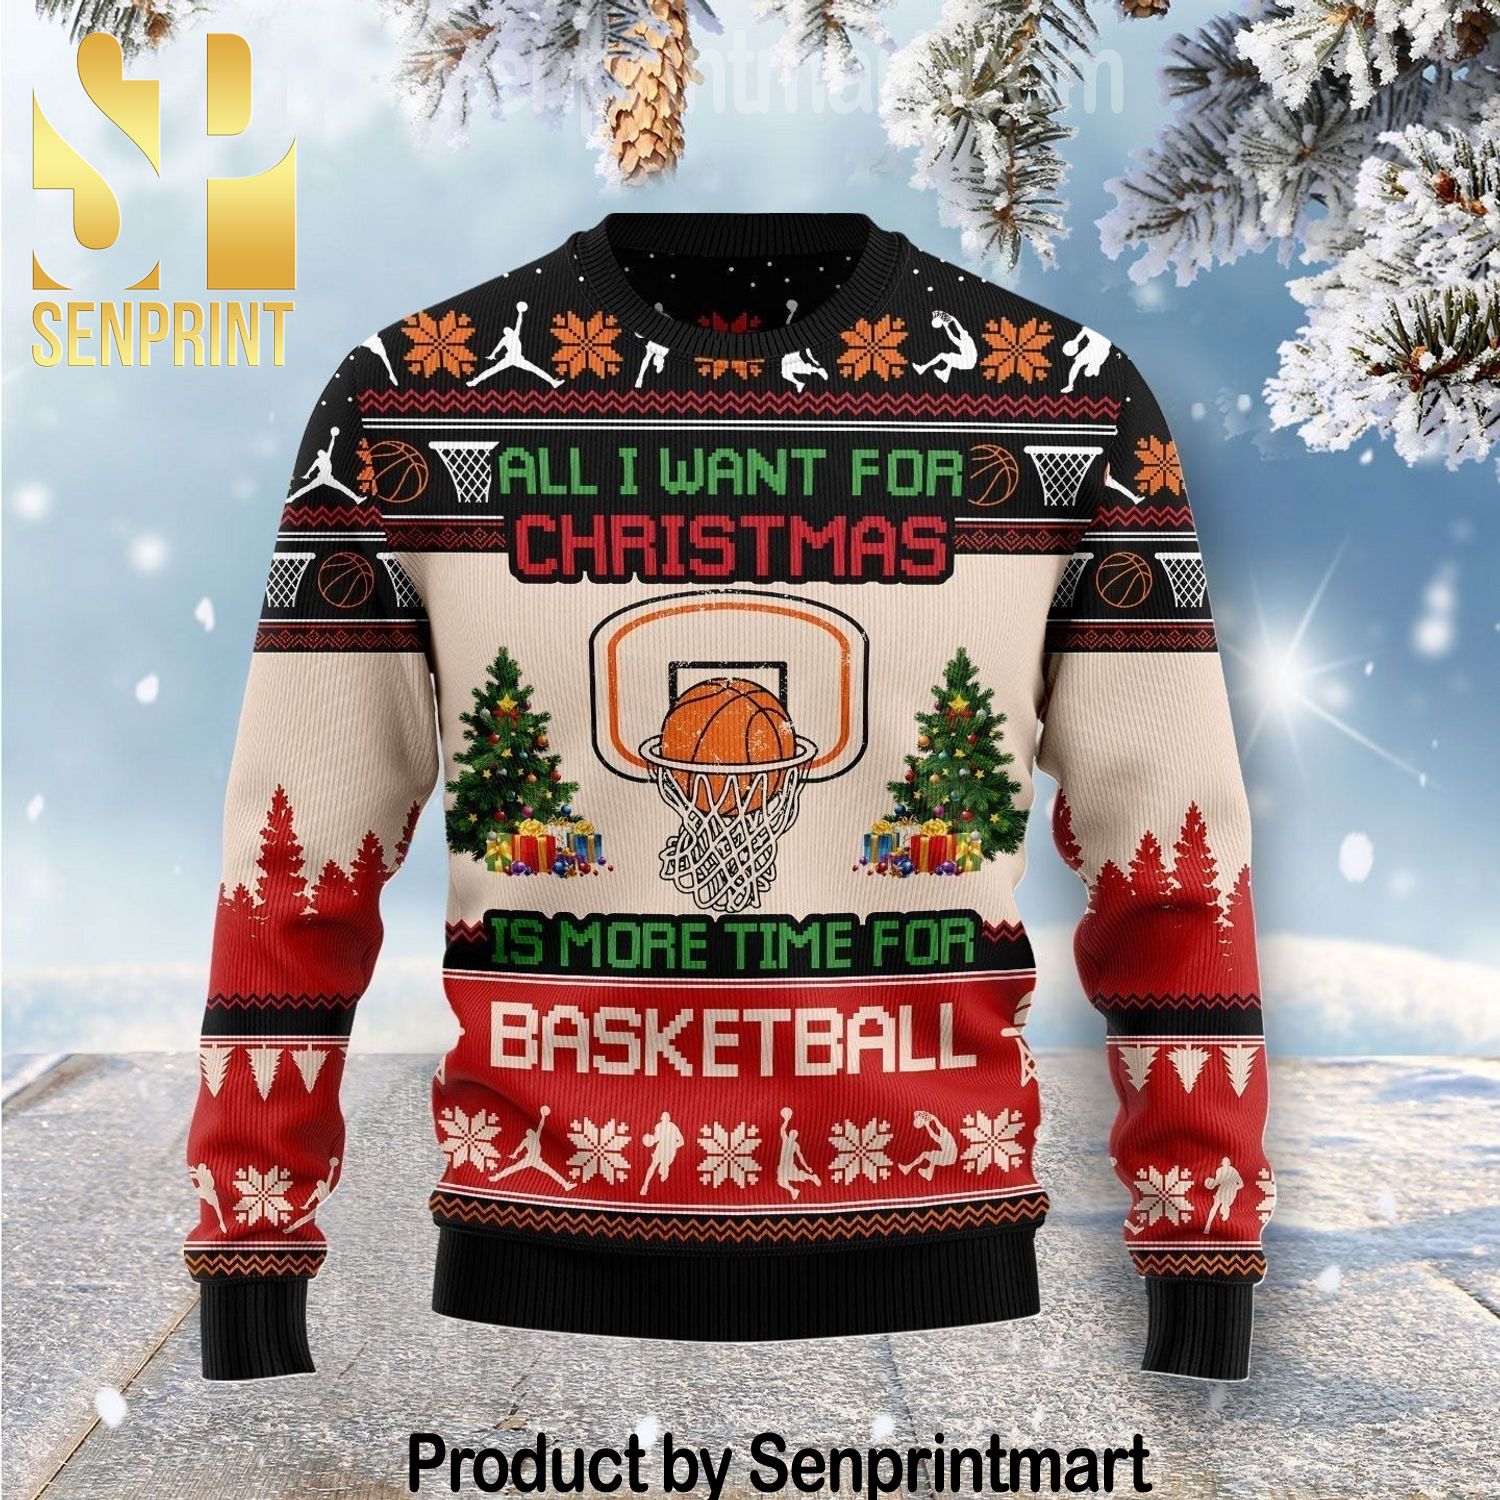 All I Want For Christmas Is More Time For Basketball Holiday Time Christmas Wool Knitted Sweater